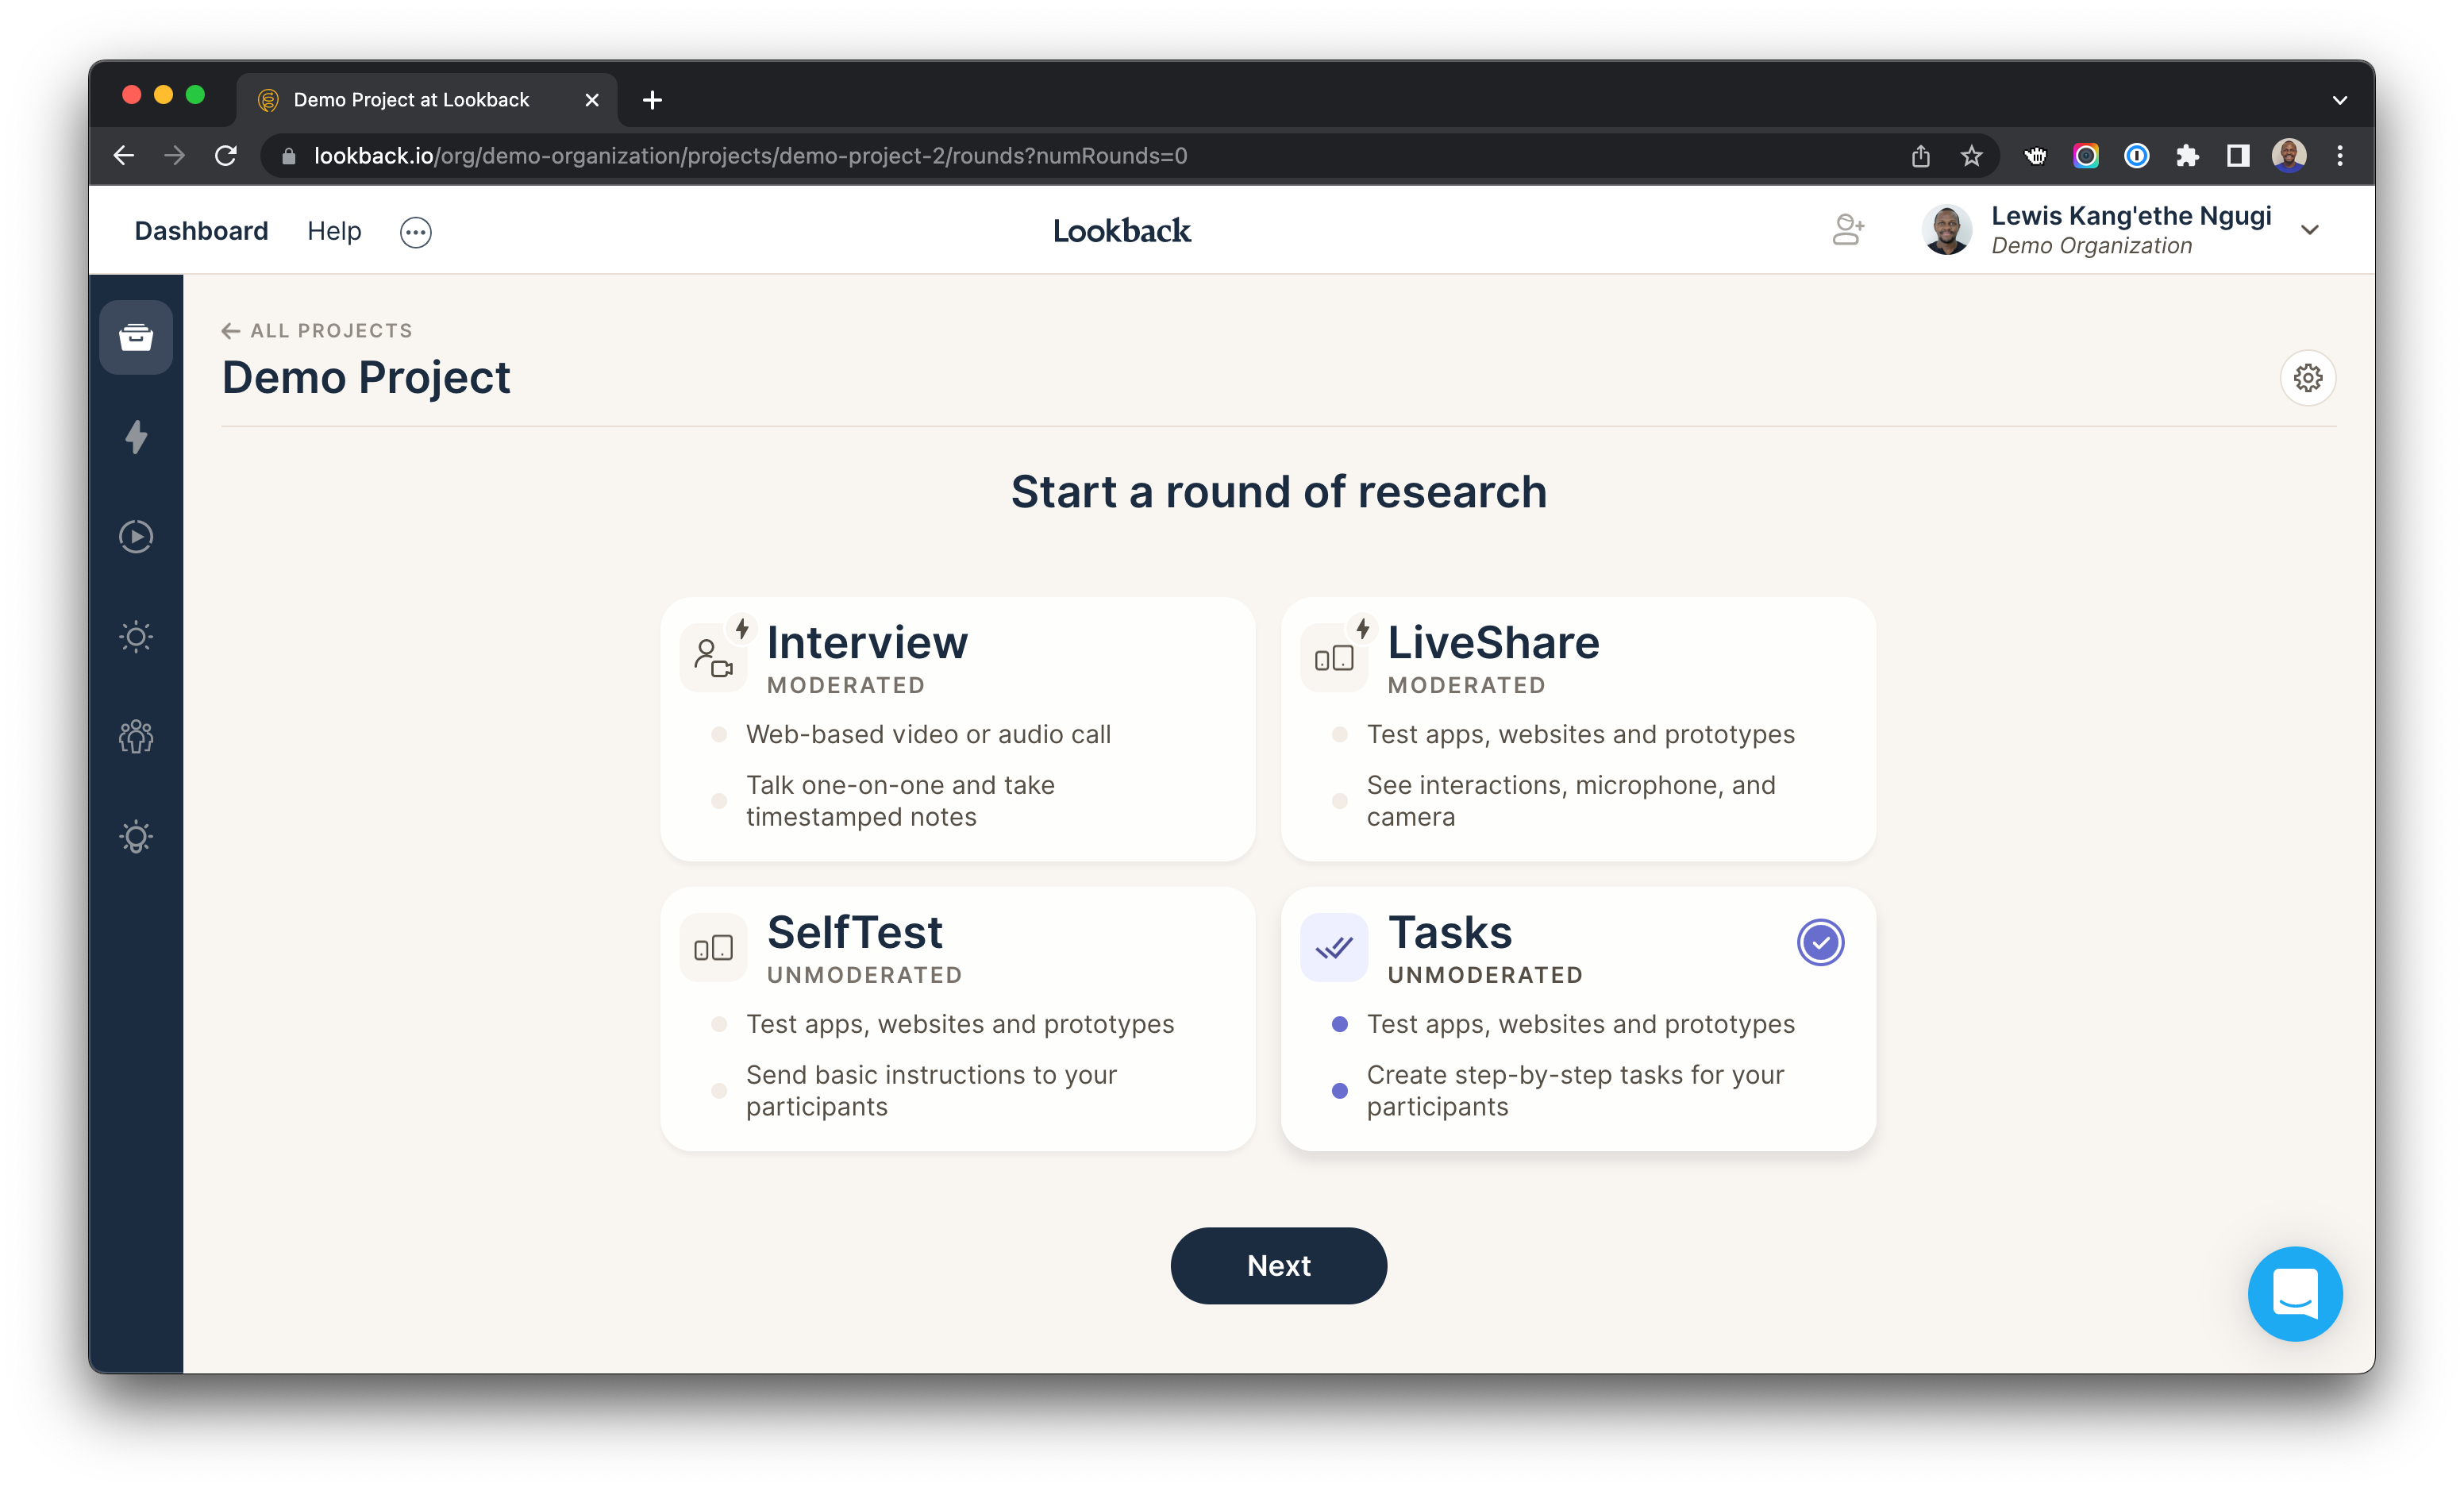 Start a round of research dashboard